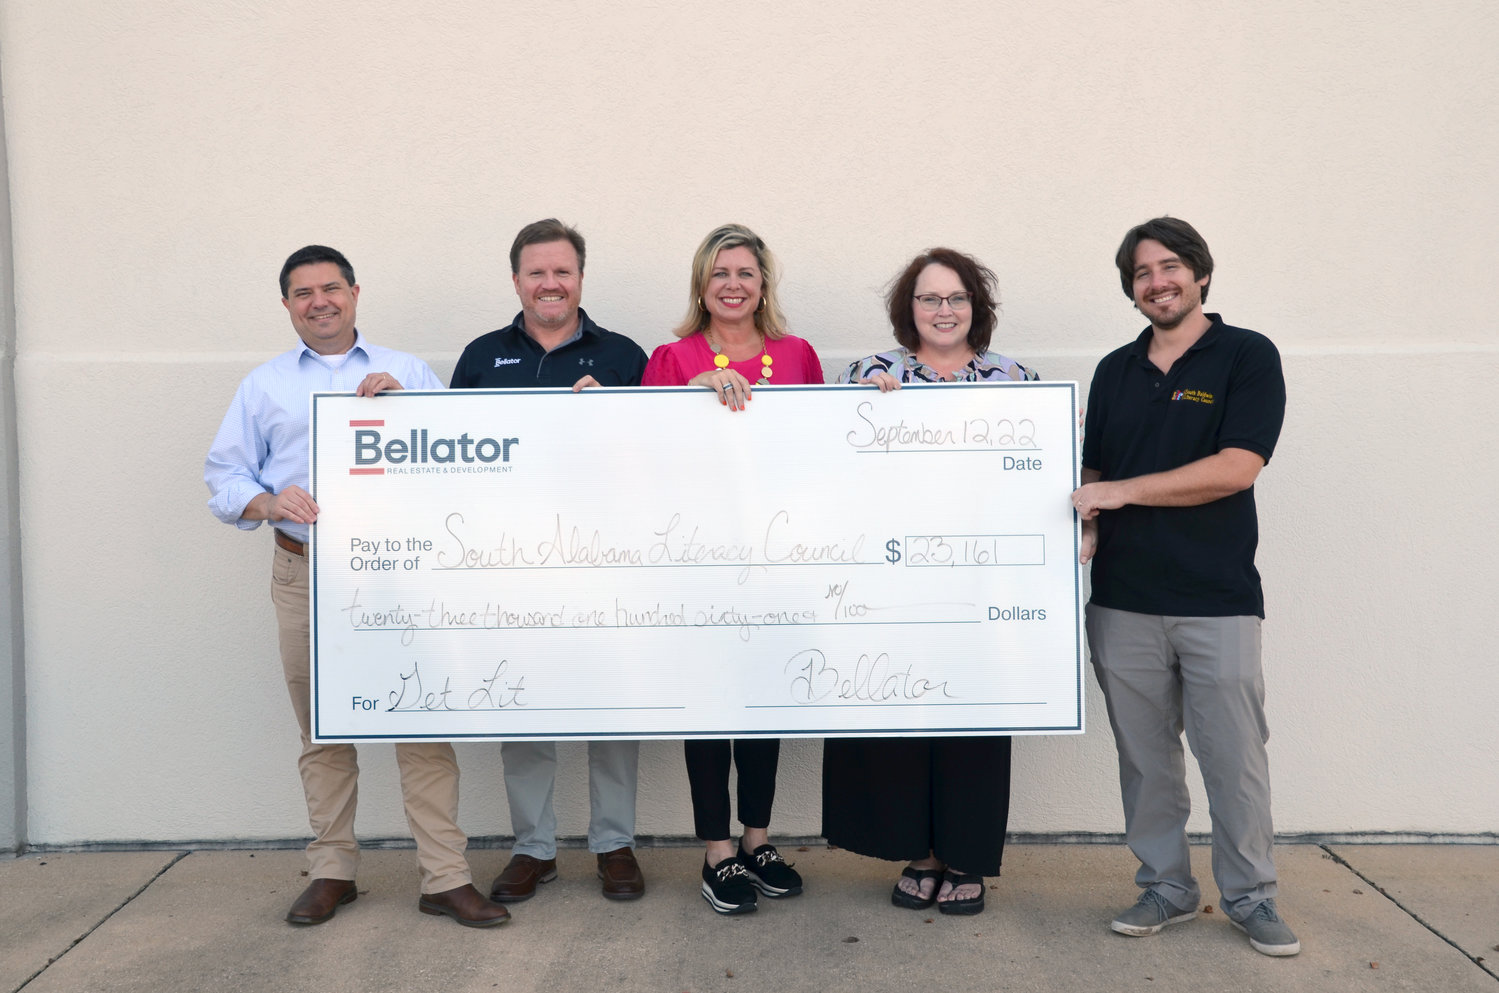 From left: Bellator chief operating officer Geoff Stacey, Bellator President Troy Wilson, Bellator Fairhope Office REALTOR® Stephanie Sandefur, SBLC Youth Services & Communications Supervisor Susan Bartholomew and SBLC Executive Director Mitchell Lee celebrated the campaign's success at Bellator's Spanish Fort Office on Sept. 12. Bellator raised $23,161 to support the SBLC's mission.